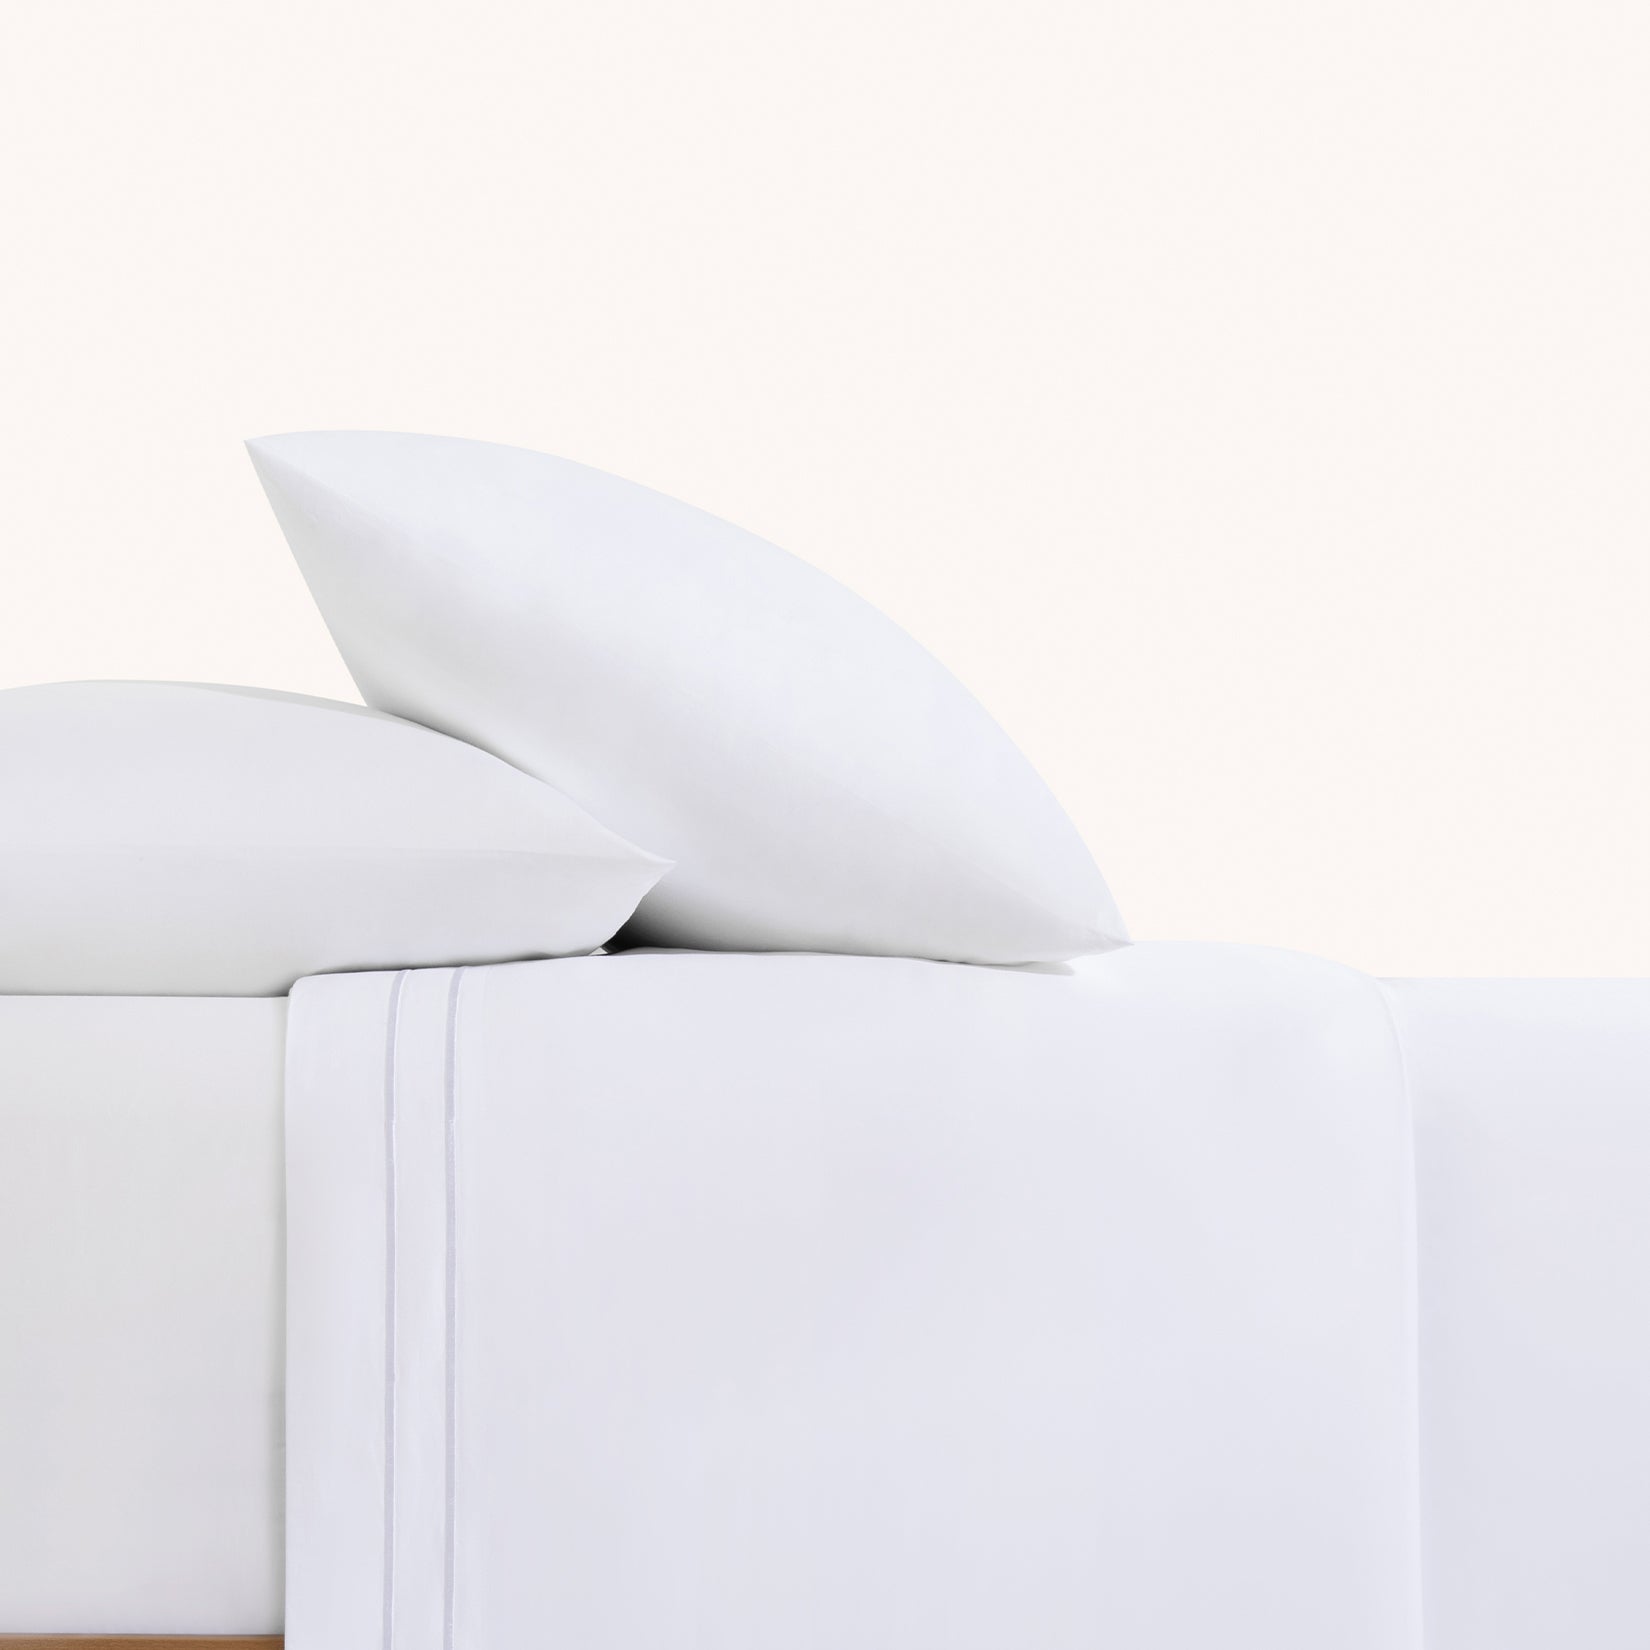 Sofia Classic White Double Satin Stitched Cuff 300 thread count cotton bed sheet set. White pillows and white sheets with embroidered hem on bed.